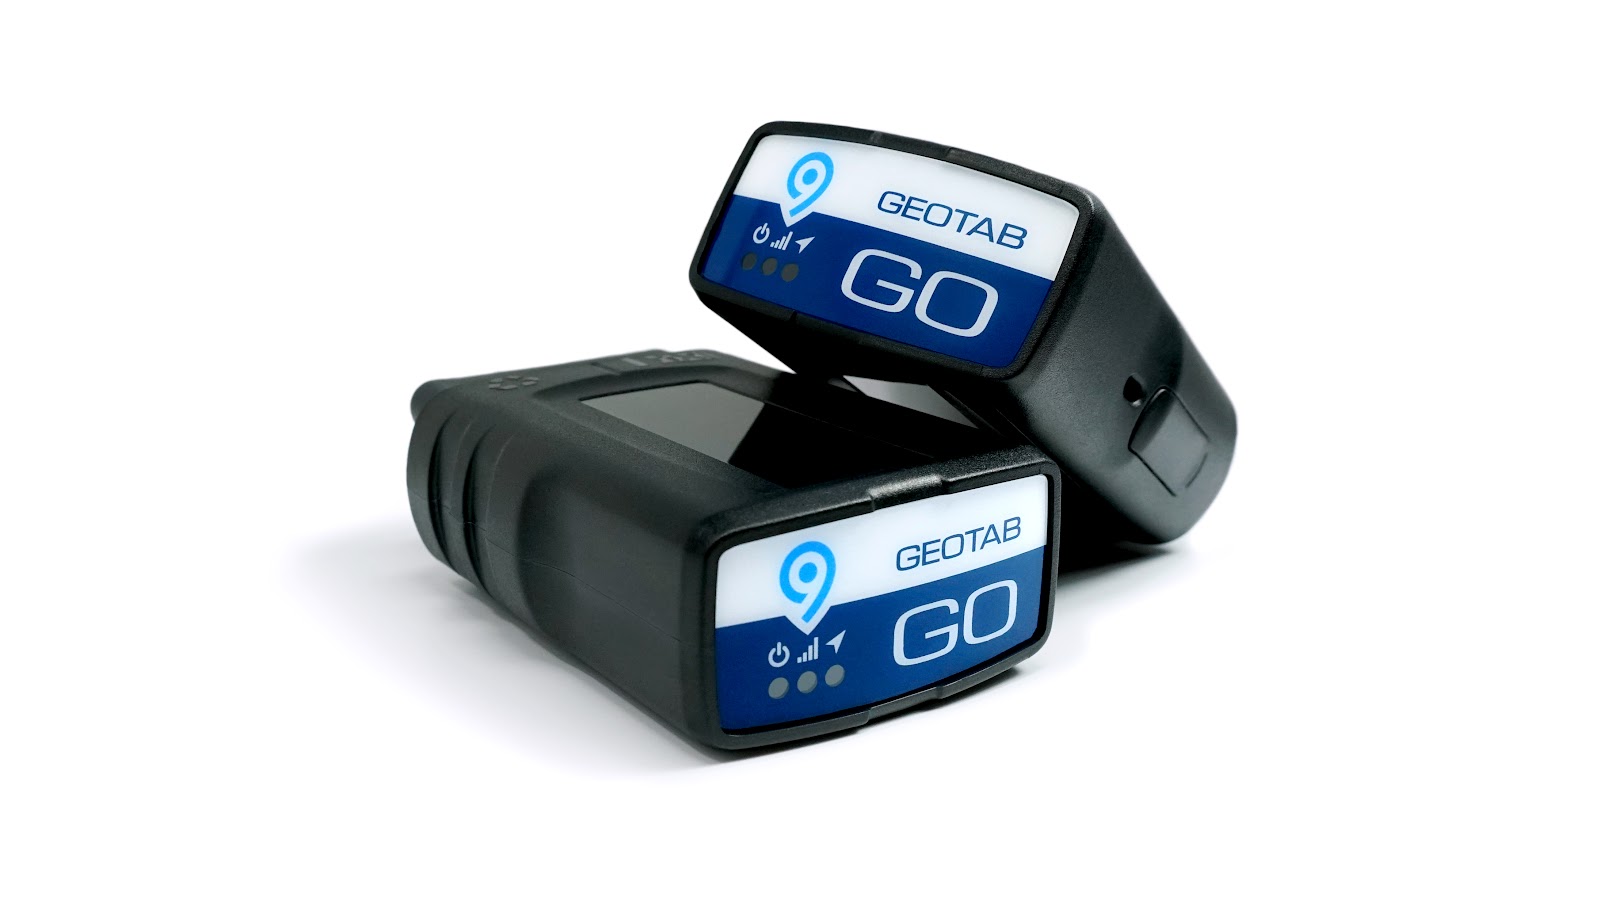 Two Geotab GO9 devices on a white background.